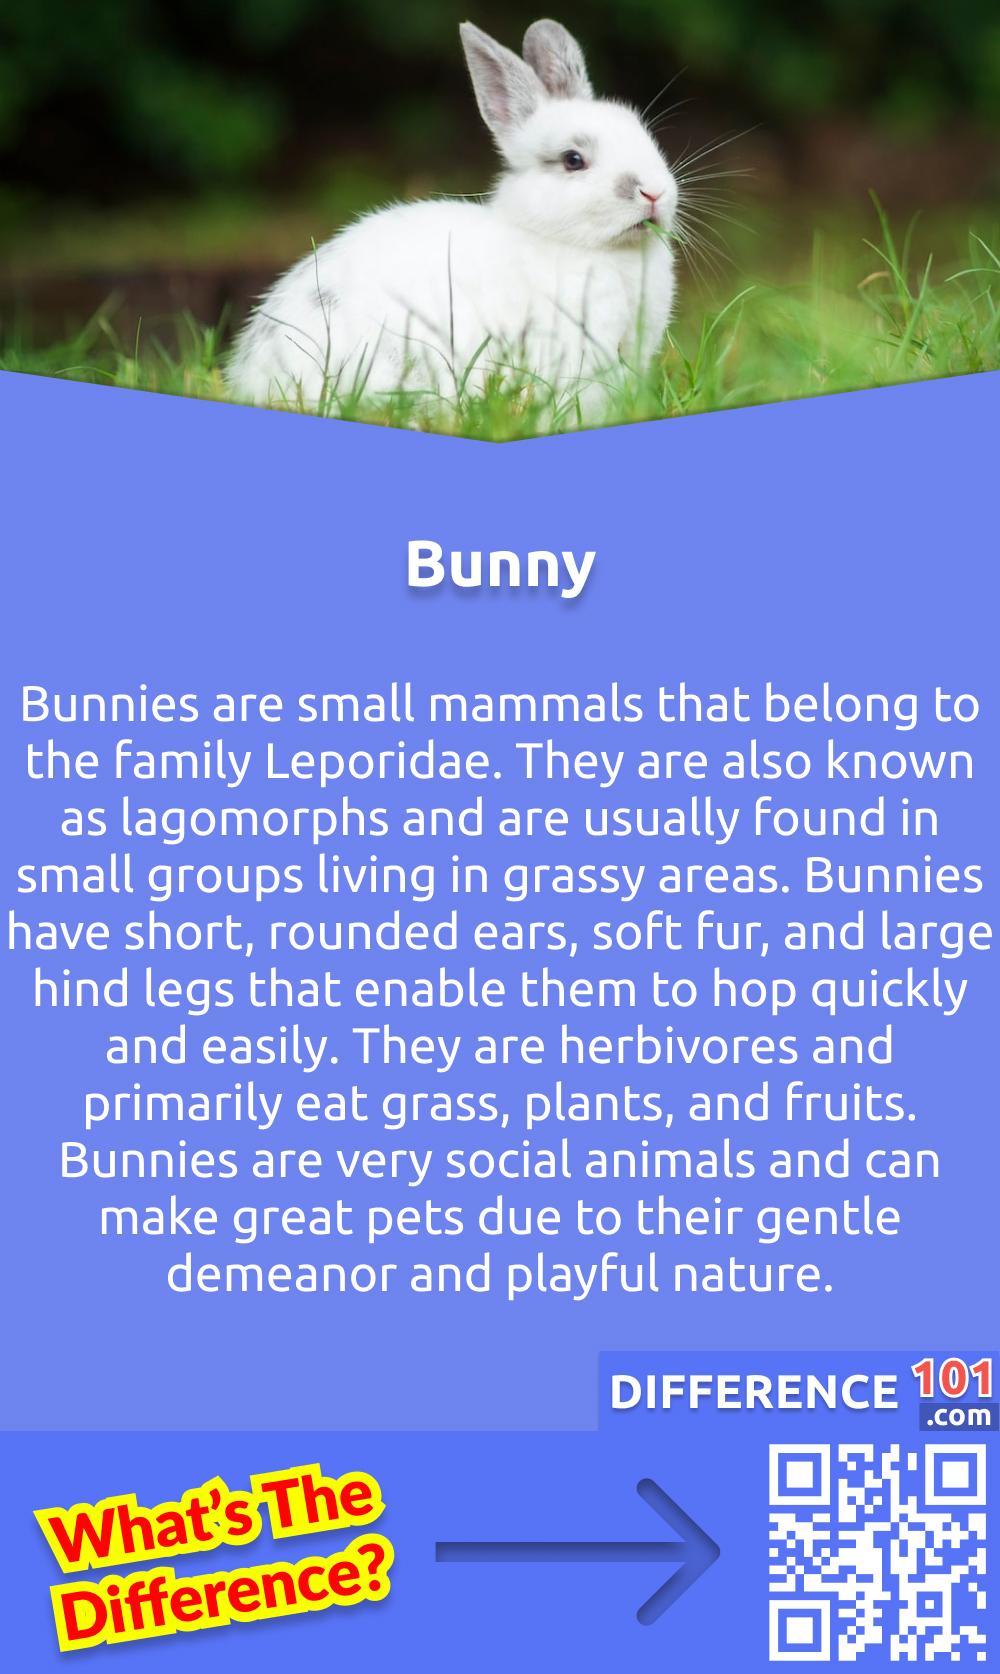 What Is Bunny? Bunnies are small mammals that belong to the family Leporidae. They are also known as lagomorphs and are usually found in small groups living in grassy areas. Bunnies have short, rounded ears, soft fur, and large hind legs that enable them to hop quickly and easily. They are herbivores and primarily eat grass, plants, and fruits. Bunnies are very social animals and can make great pets due to their gentle demeanor and playful nature. They require regular exercise, a safe outdoor area, and plenty of hay-based food and vegetables in order to stay healthy. Bunnies are also relatively low maintenance pets compared to other animals, making them an ideal choice for those looking for a small companion animal.